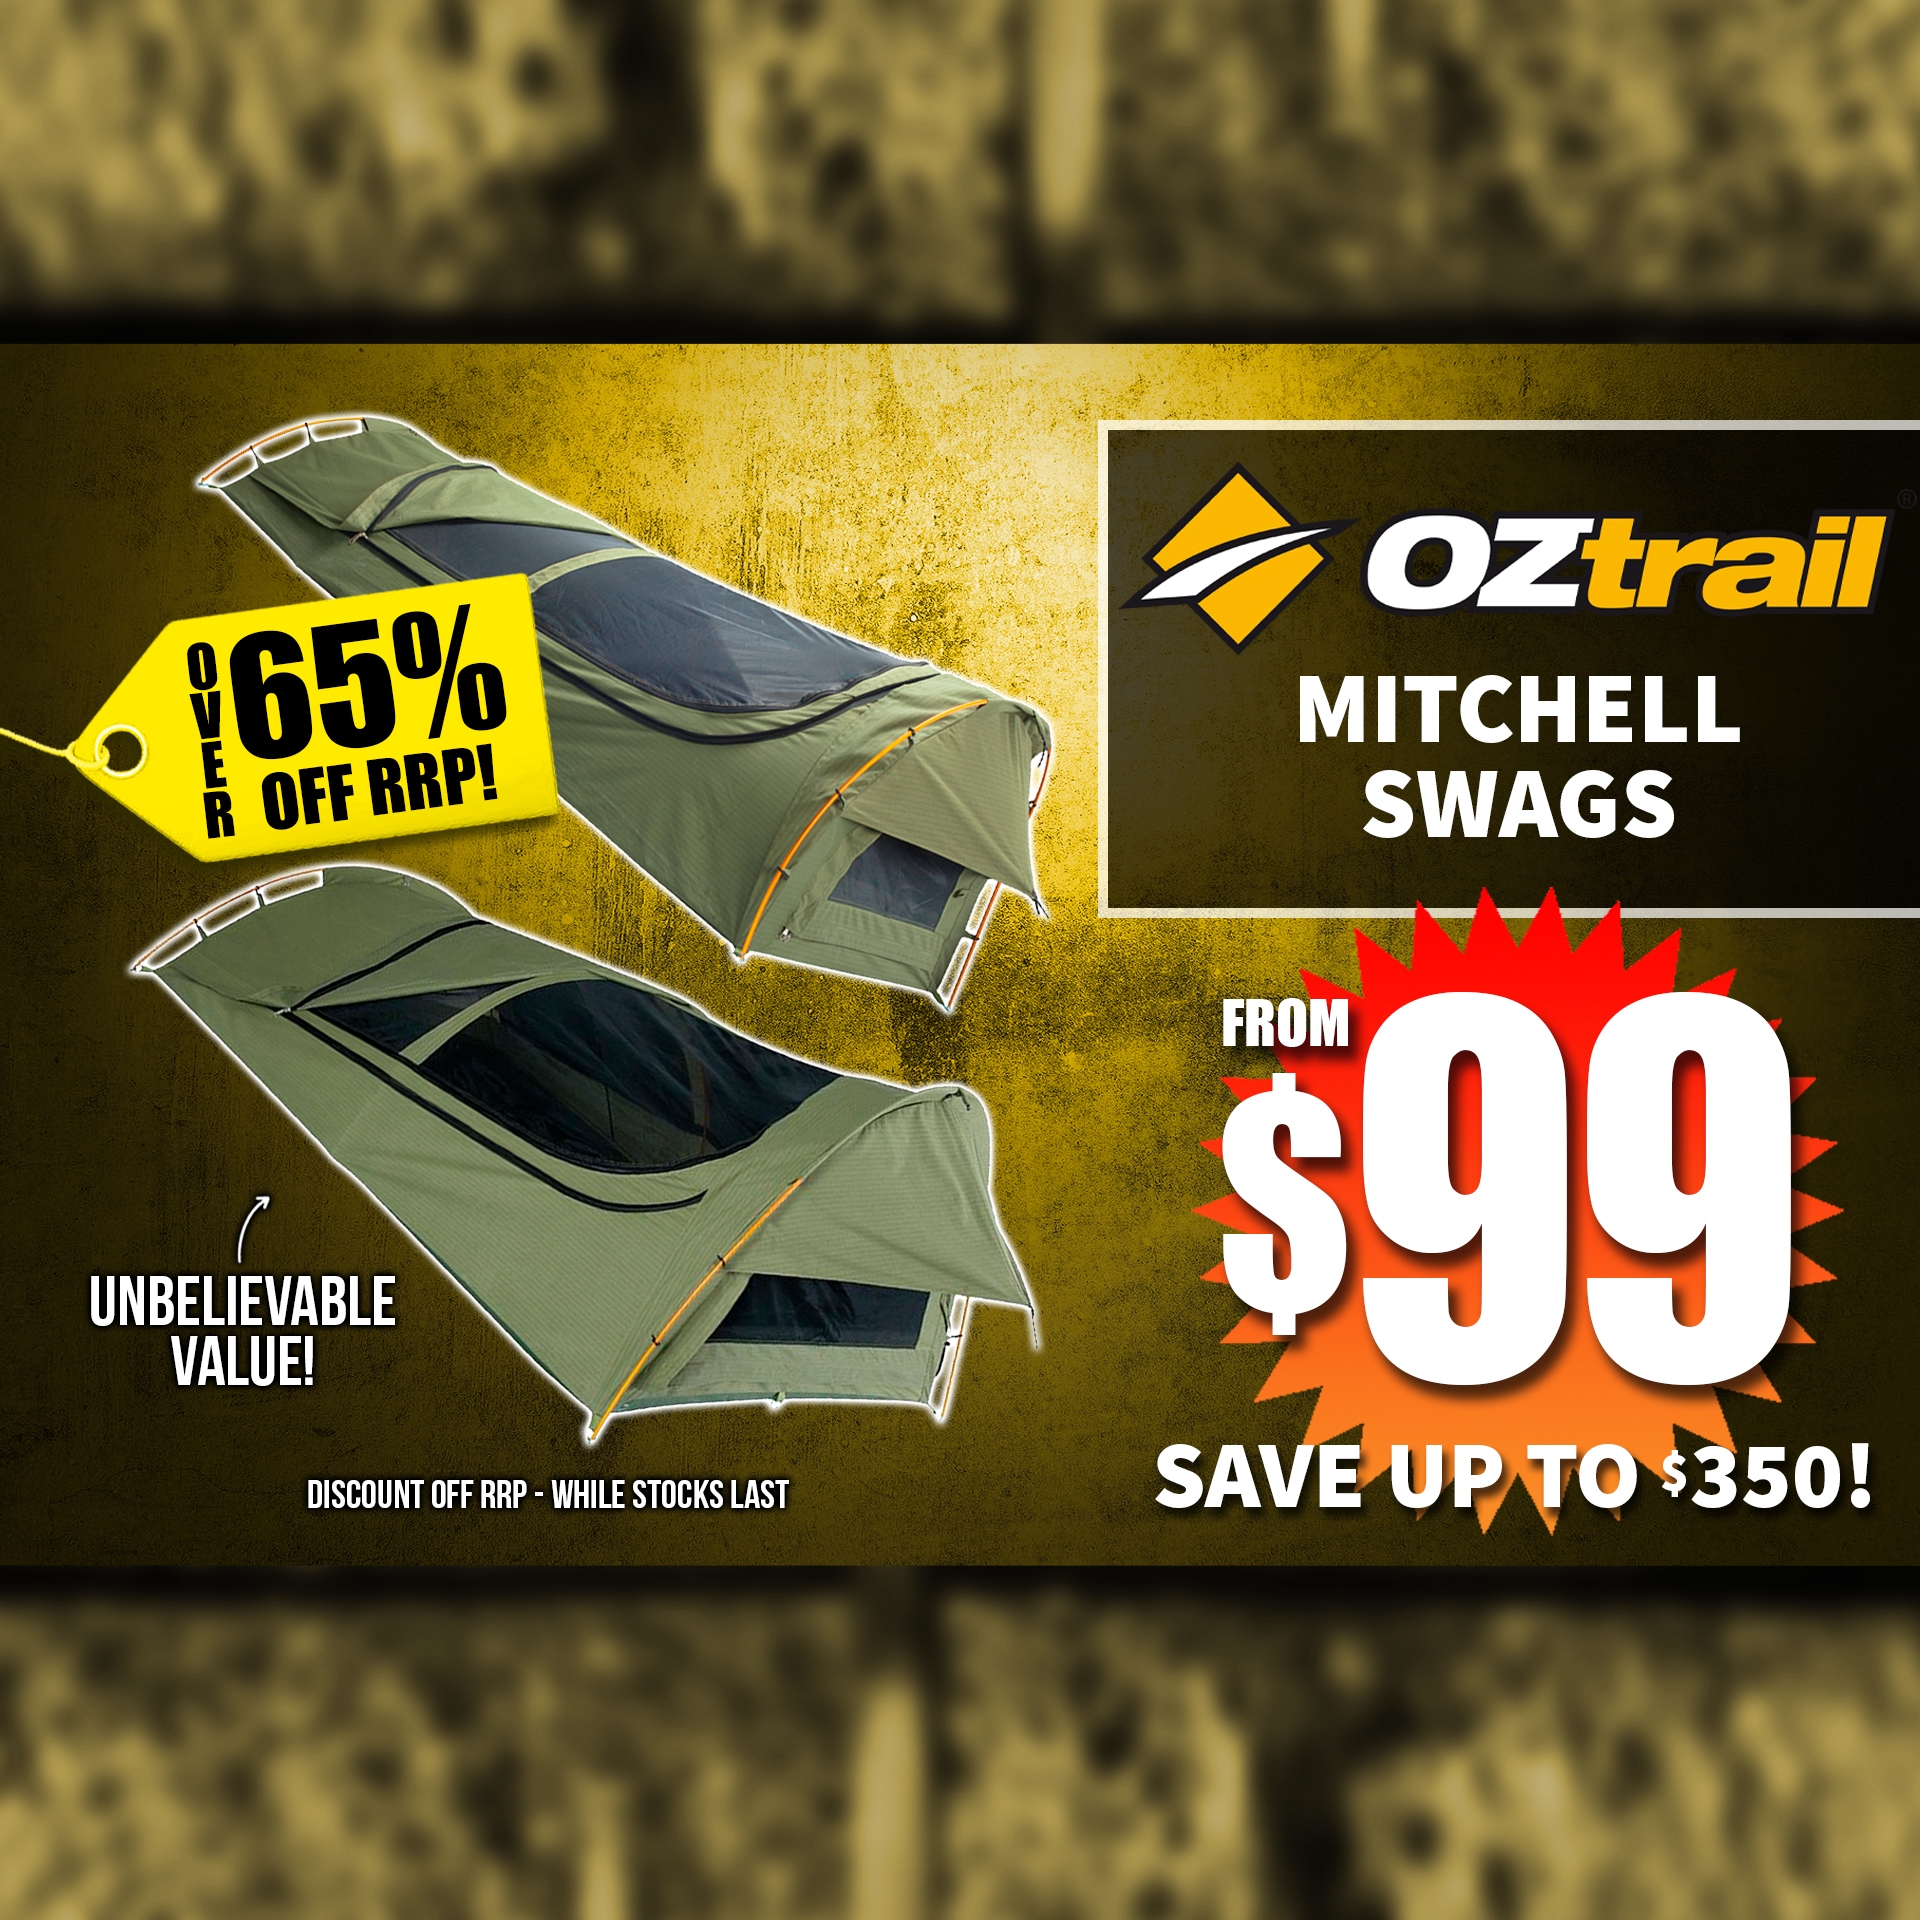 Oztrail Mitchell Swags from $99